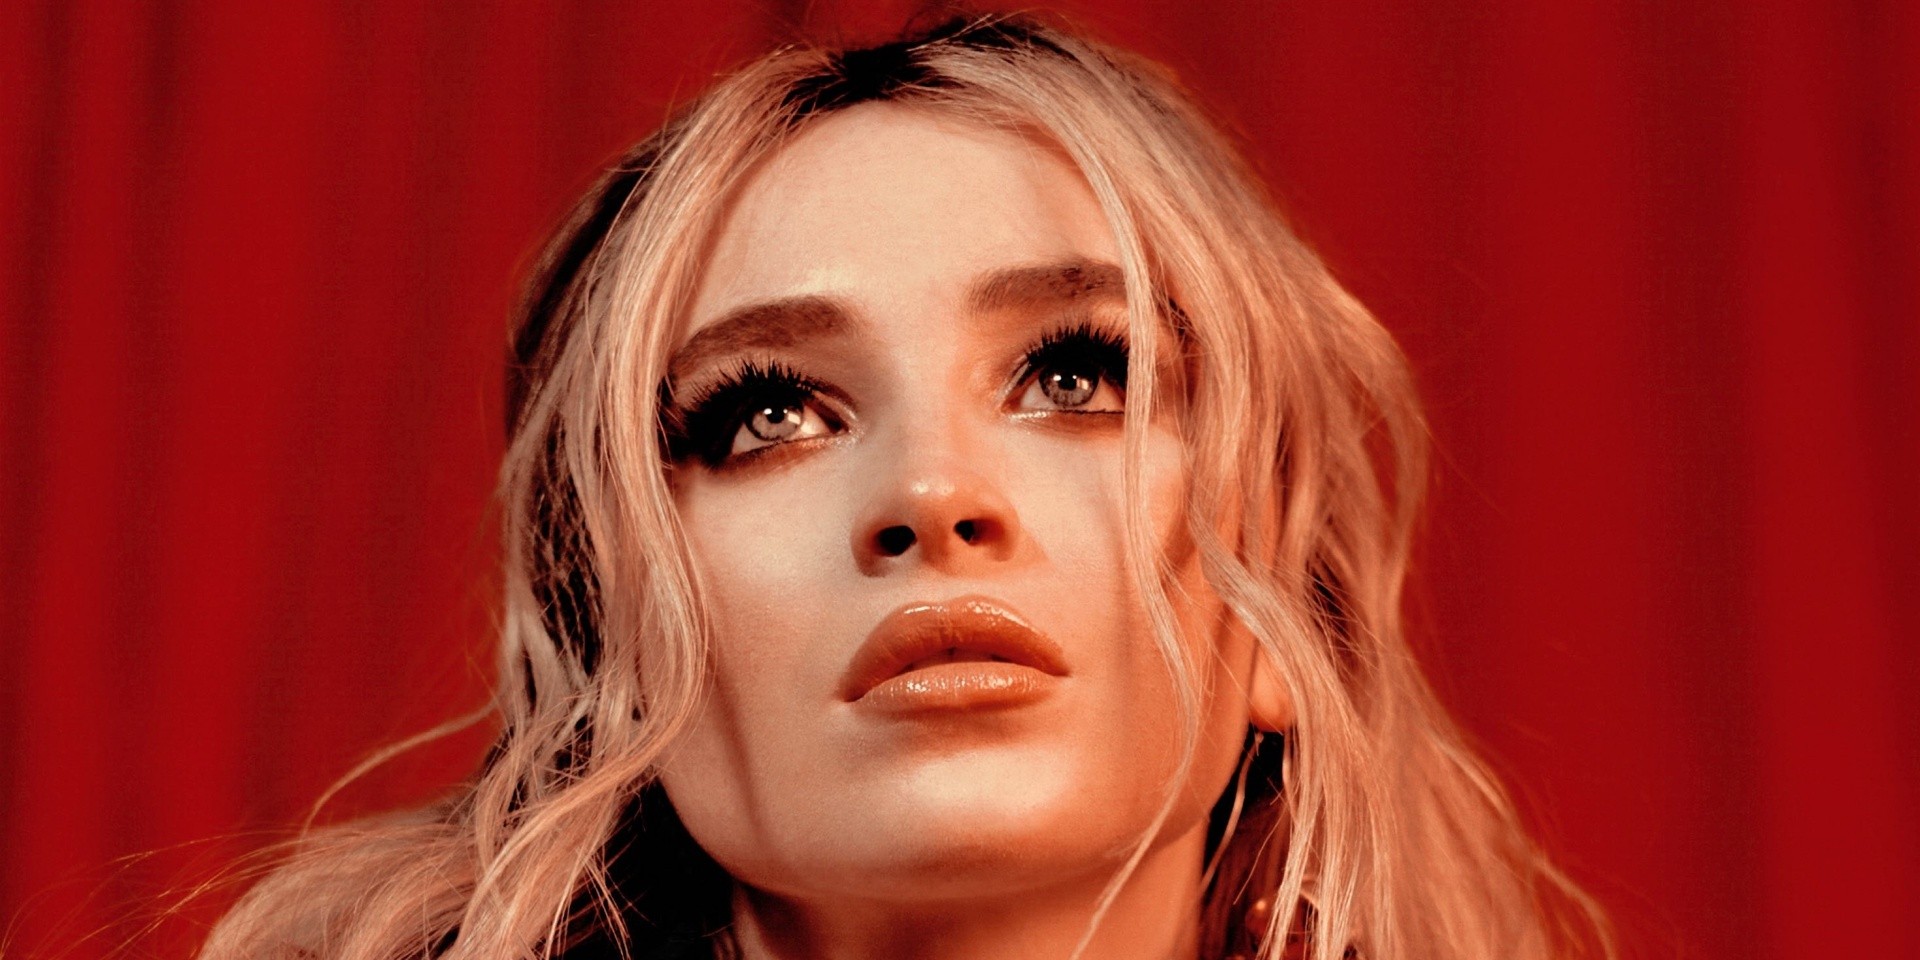 "I don't think it's ever selfish to put yourself first": An interview with Sabrina Carpenter